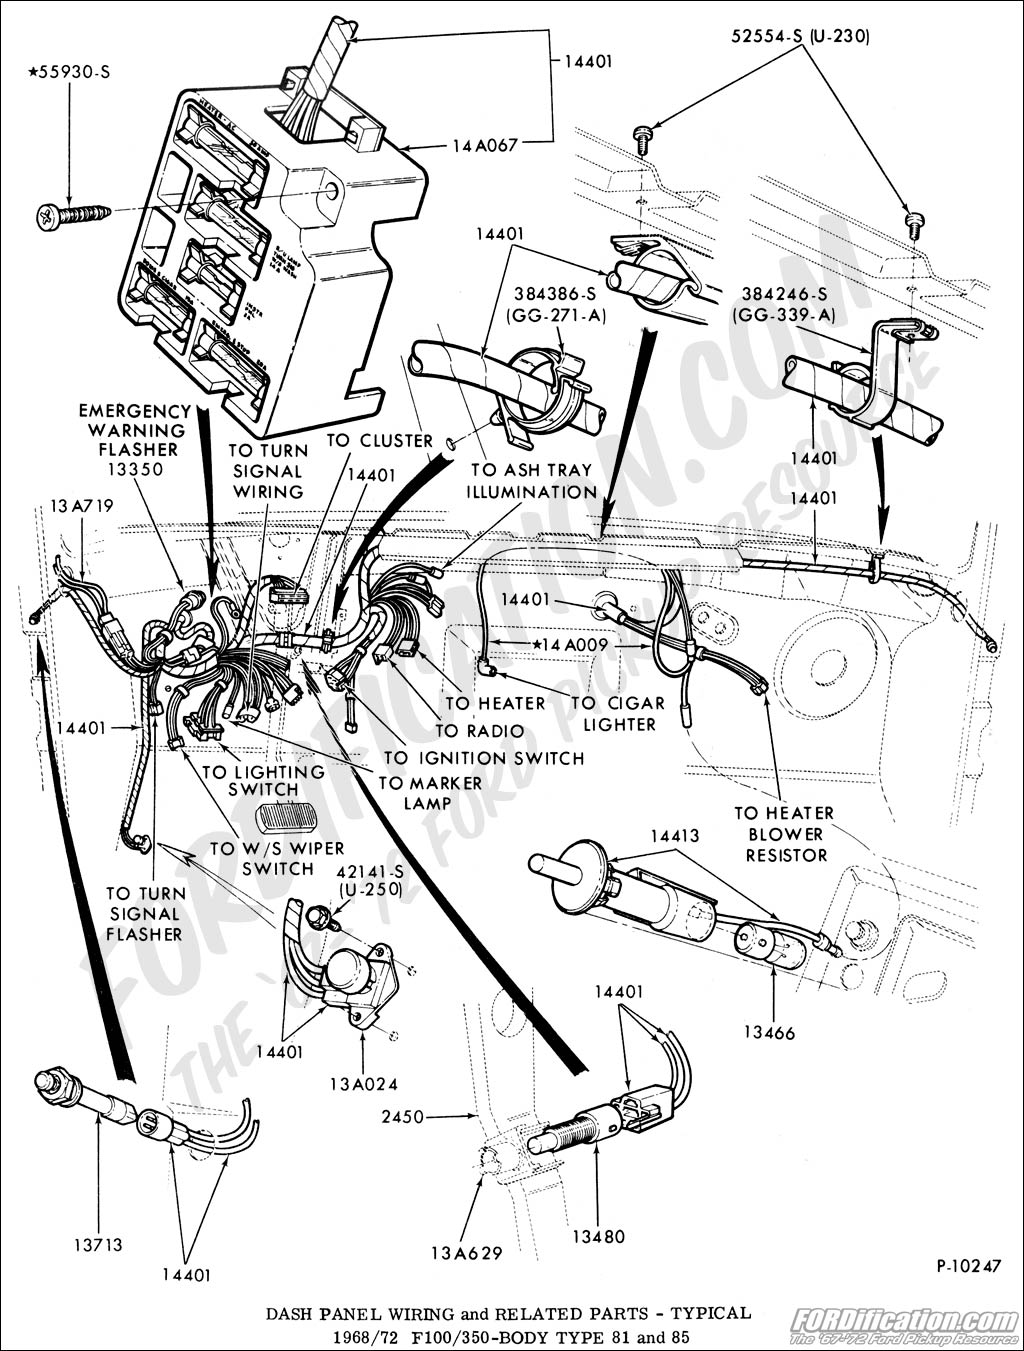 1966 Mustang Ignition Wiring Diagram from www.fordification.com